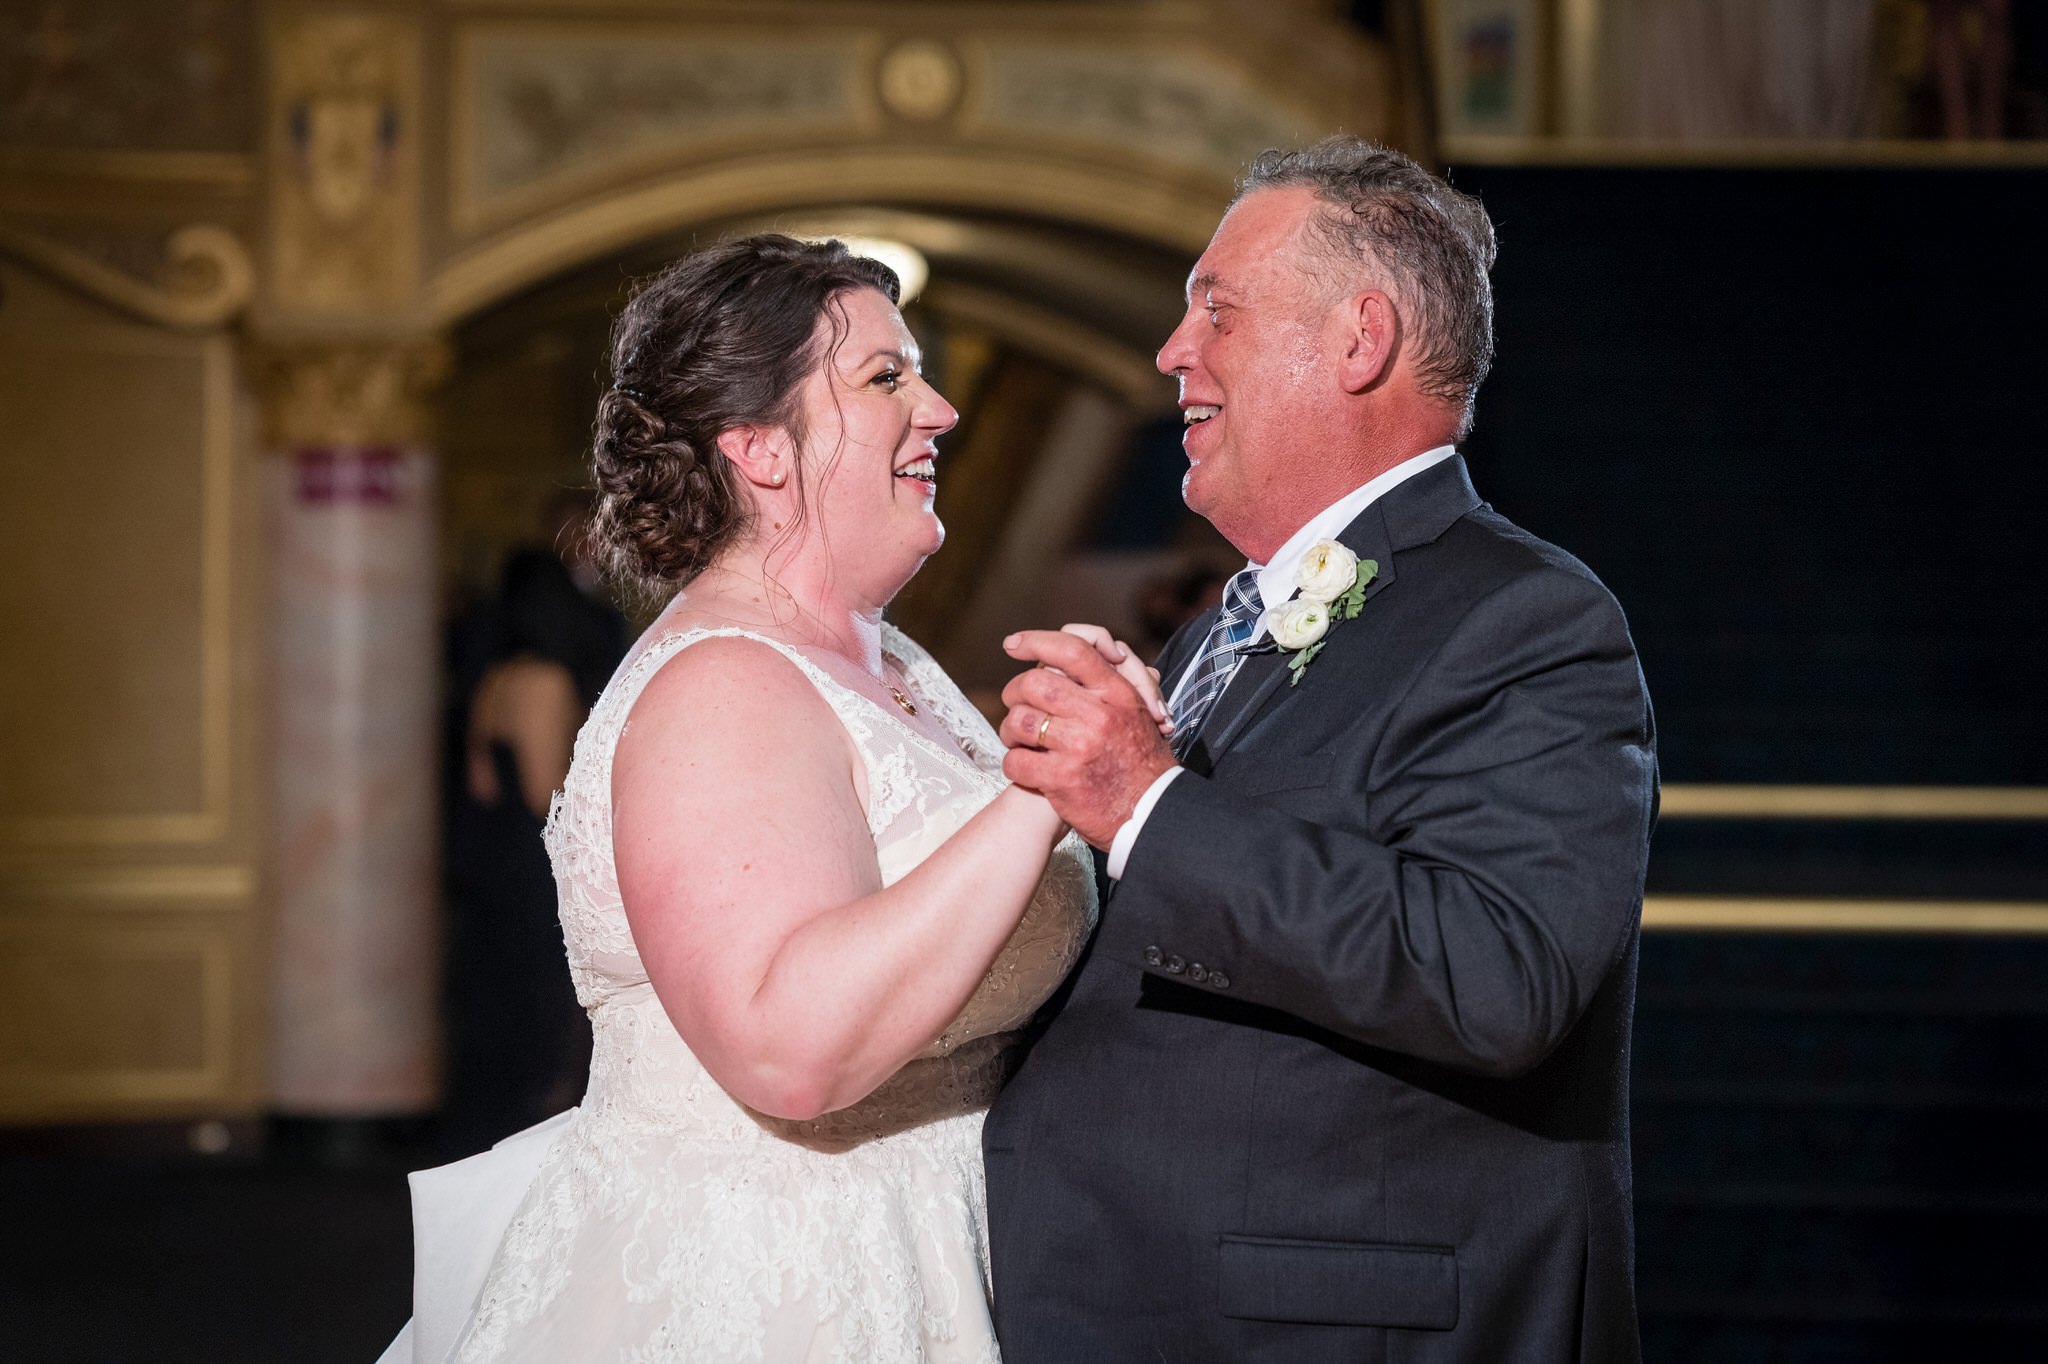 A bride and her dad dance holding hand at the Detroit Opera House